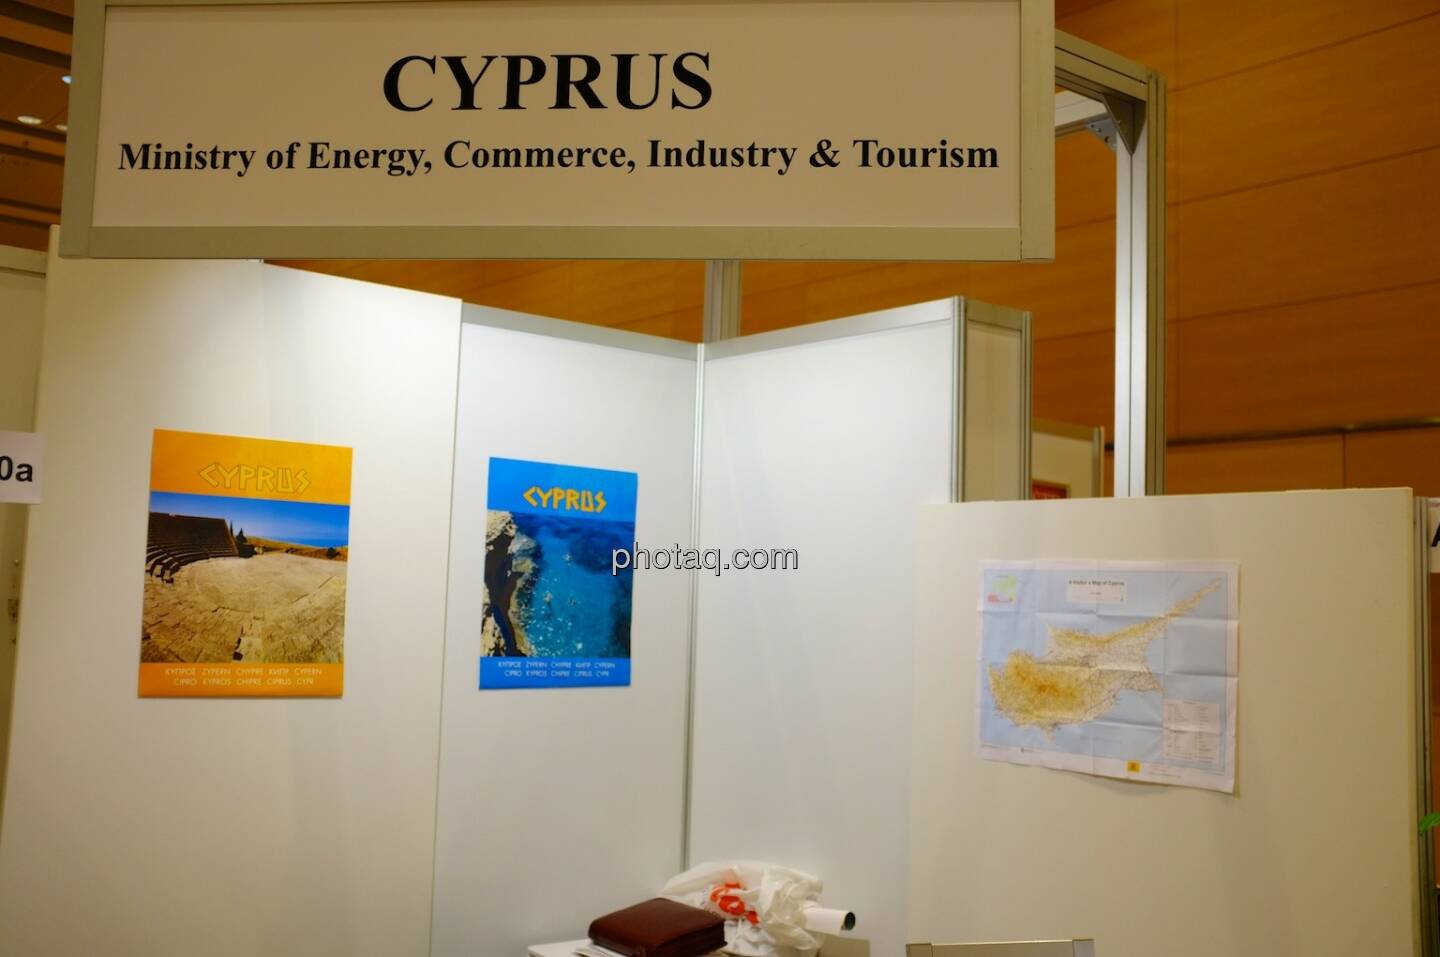 Cyprus, Ministry of Enery, Commerce, Industry & Tourism